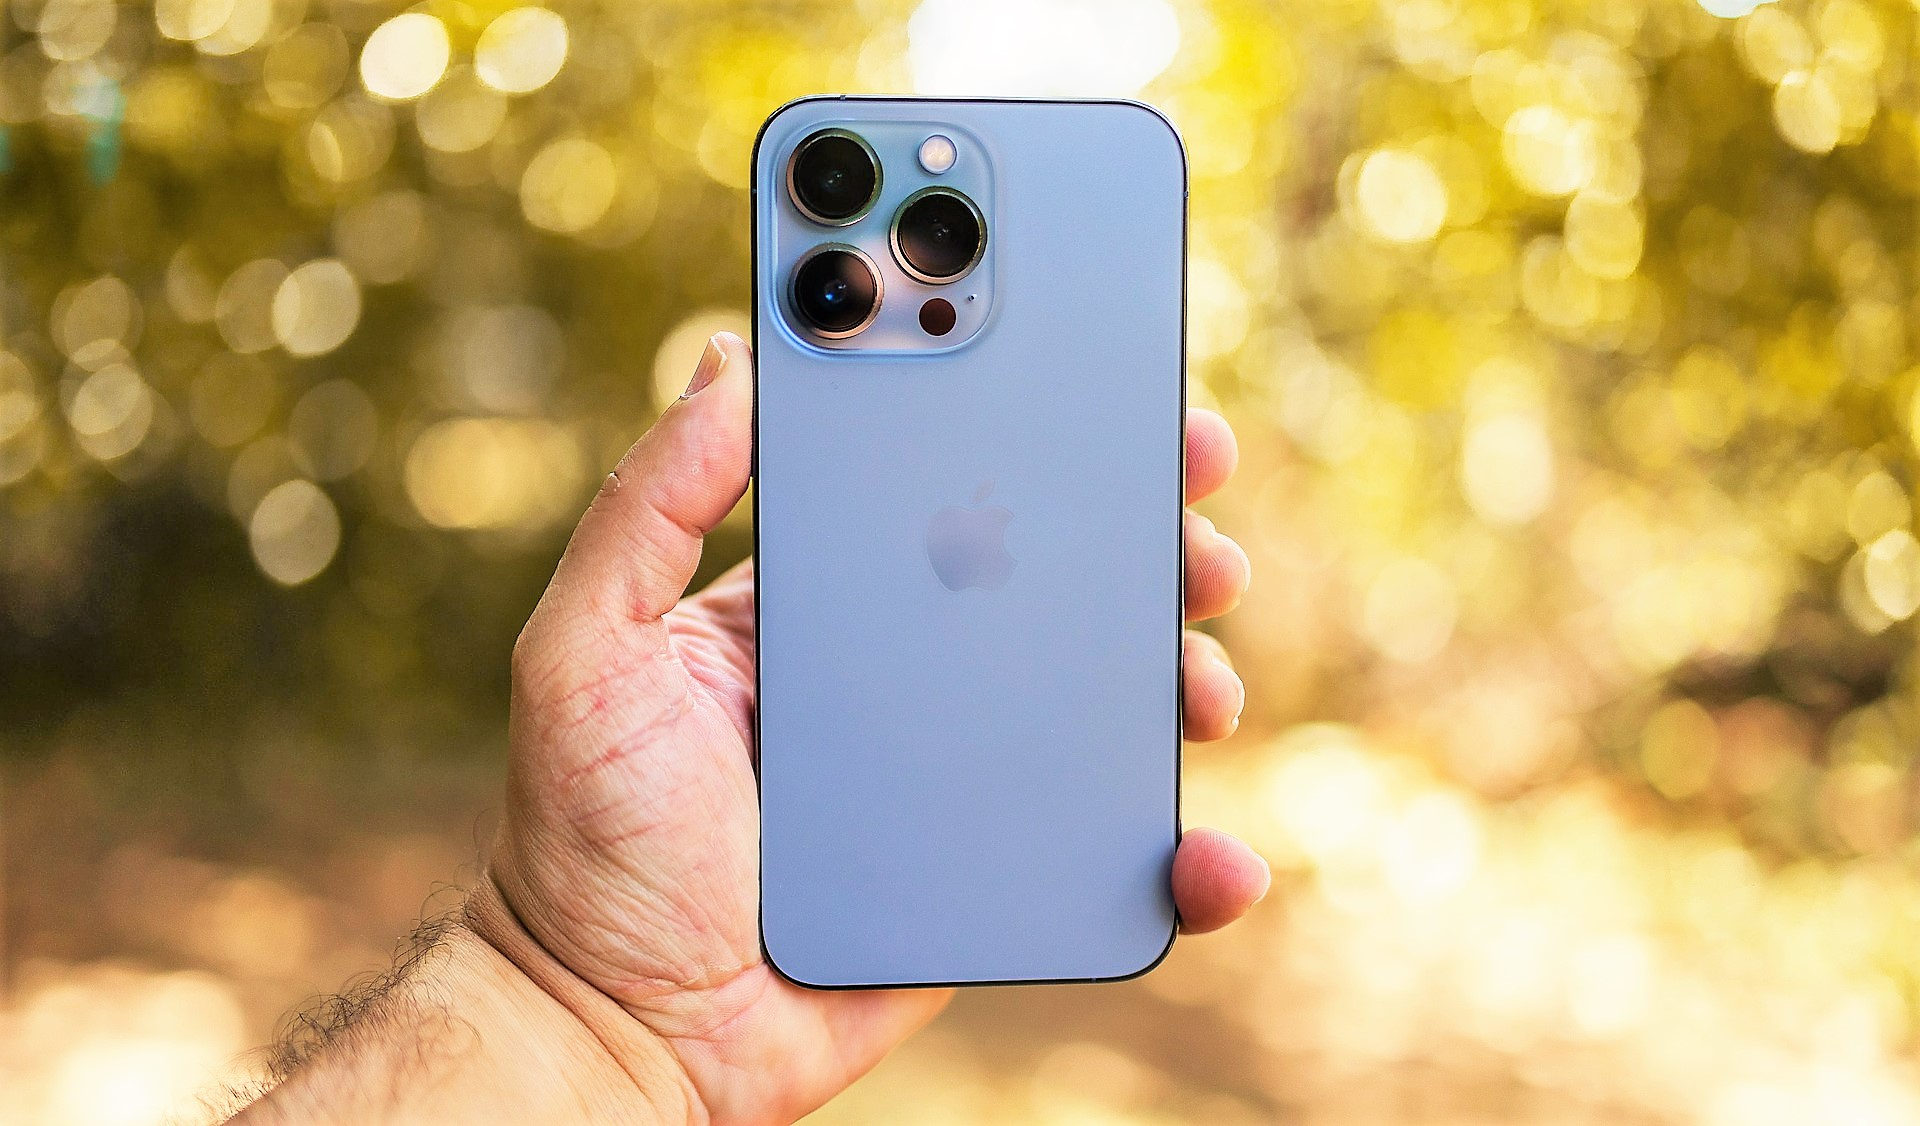 iPhone 13 Pro Max in Sierra Blue in hand against a blurred nature background